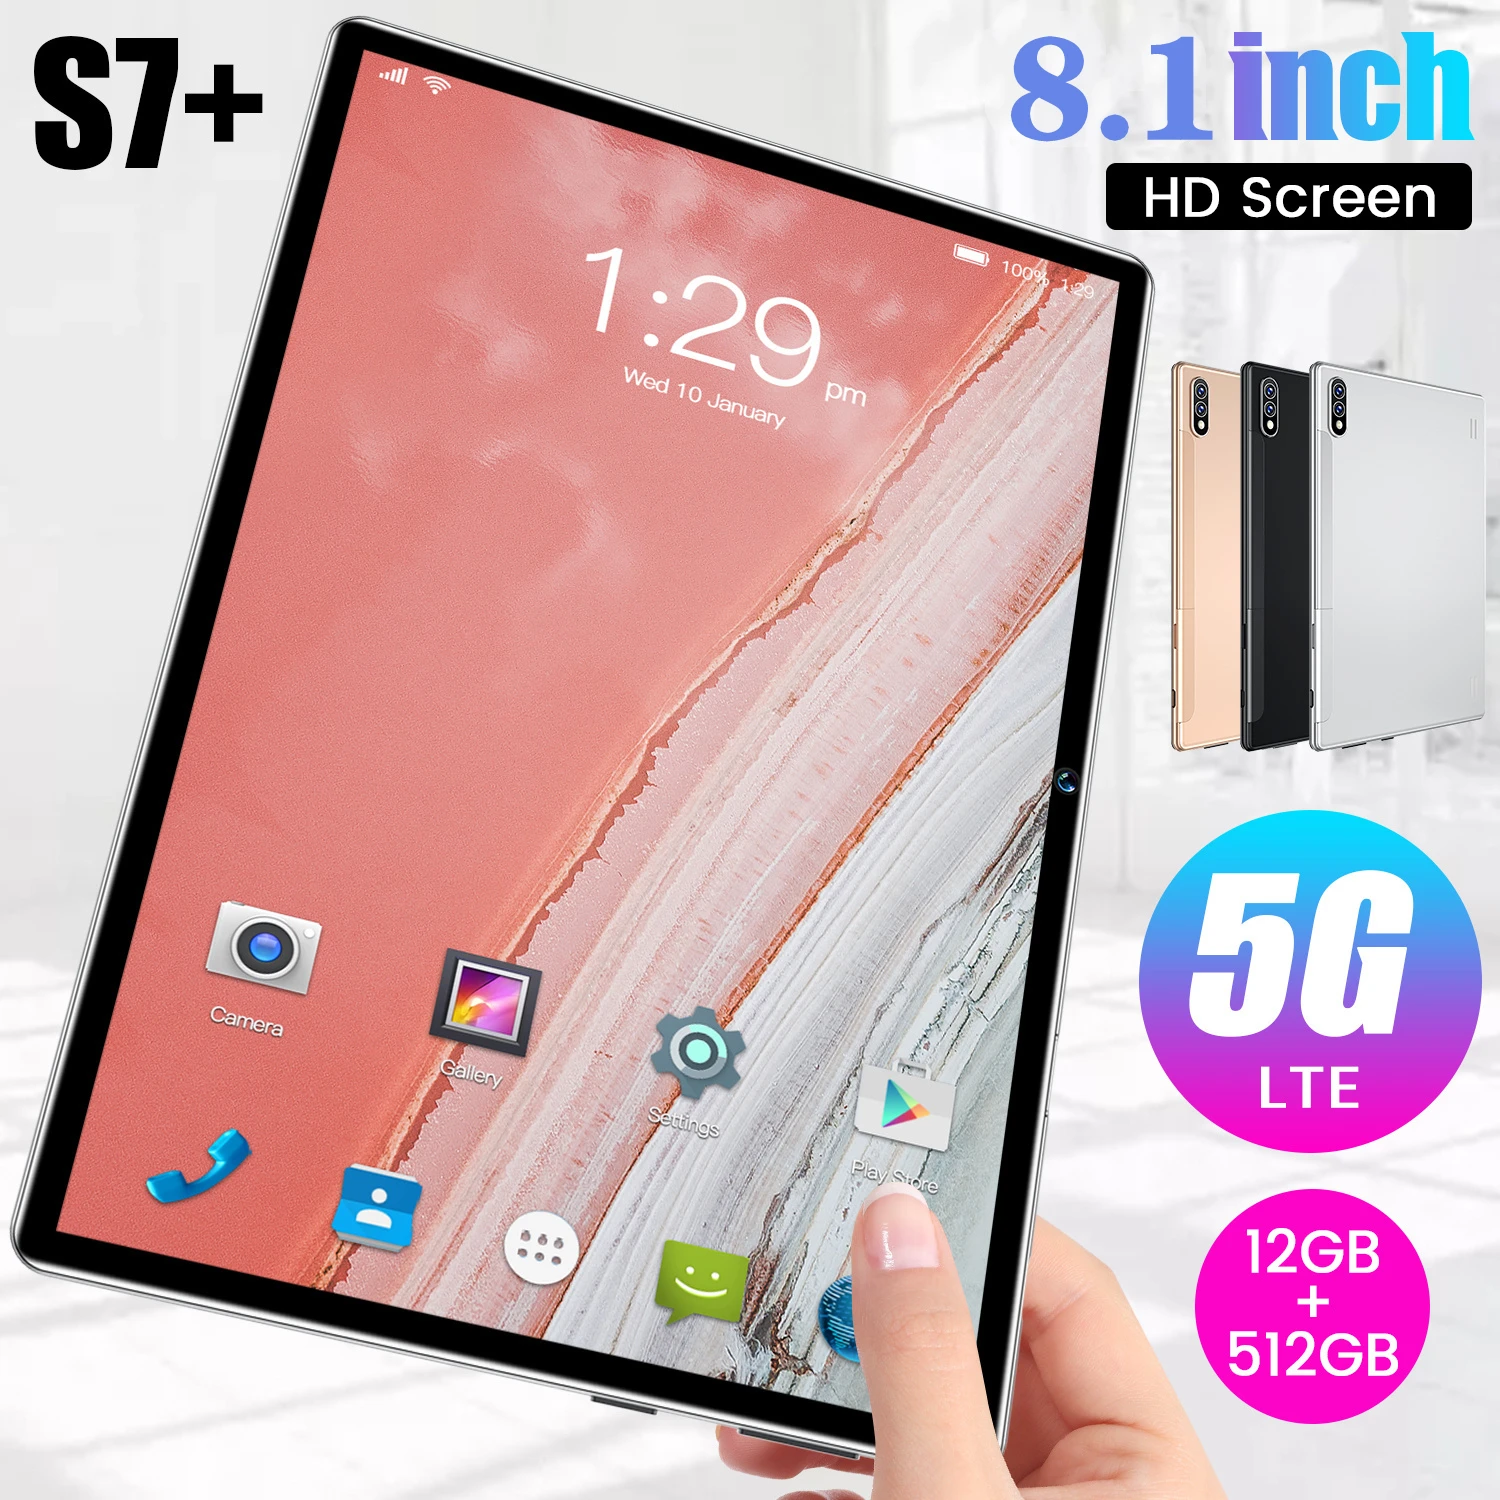 latest tablets Tablet PC S7+ 5G 8.1 Inch LTE 12GB+512GB Android10.1 16MP+32MP Camera Google Play 8000mAh Bluetooth WIFI Laptop Free Shipping note taking tablet with pen